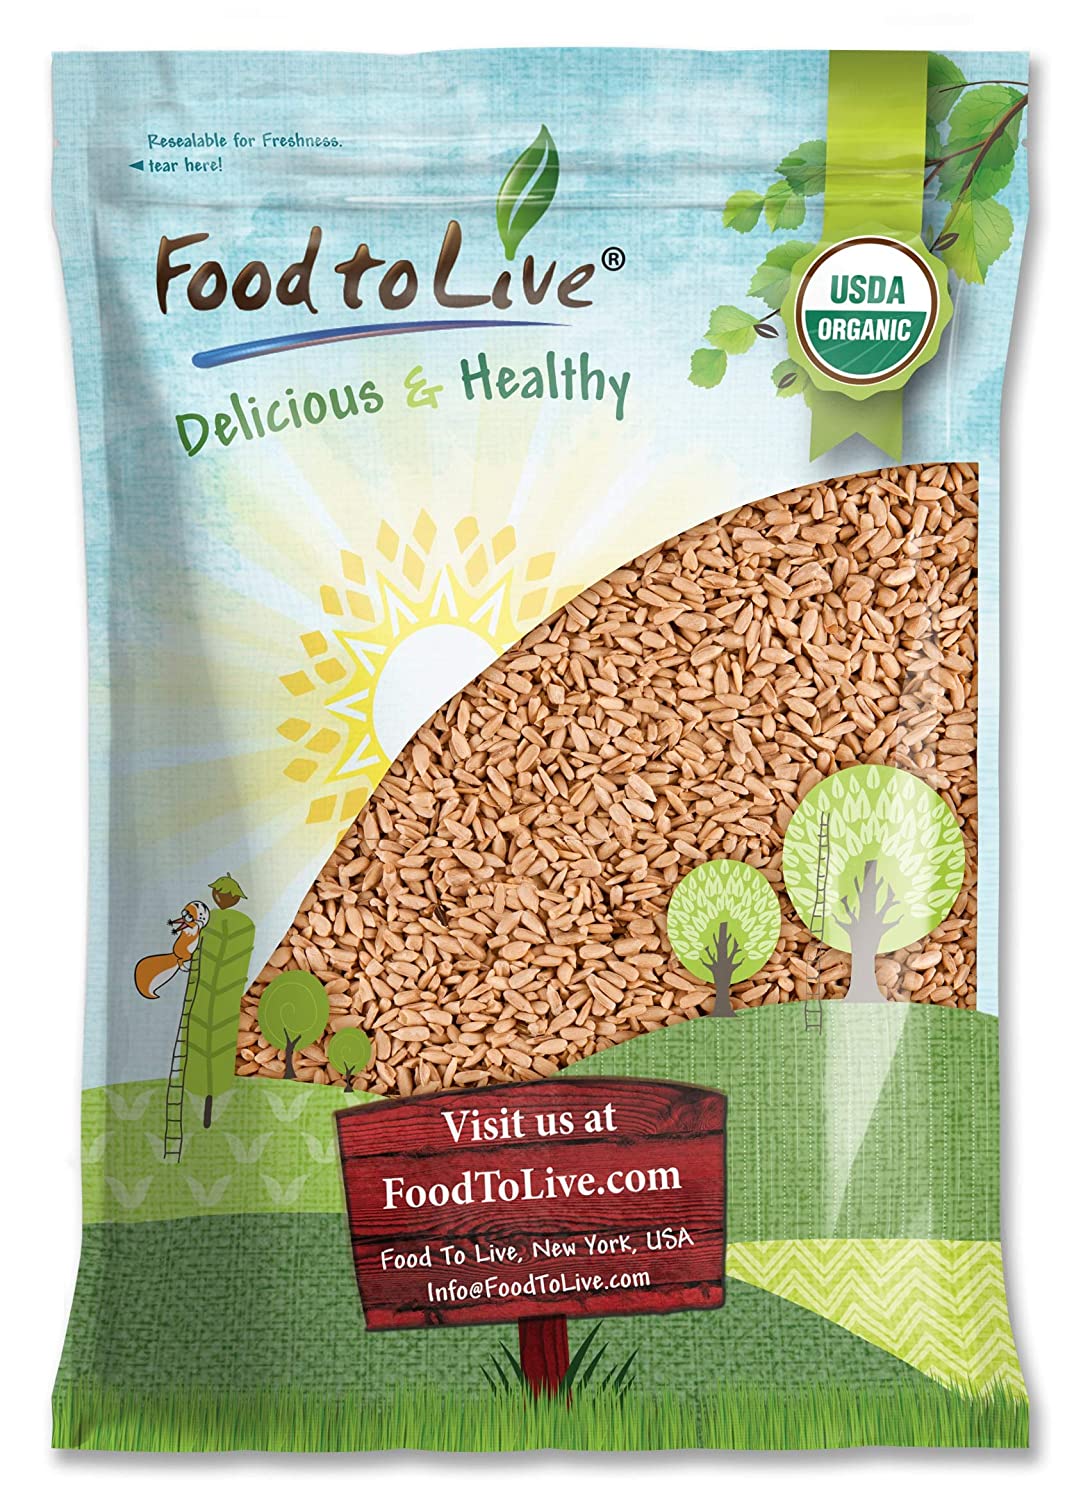 Organic Dry Roasted Sunflower Seeds with Himalayan Salt - Non-GMO Kernels, Vegan, Kosher, Bulk, Hulled,Great for Snacking, and Cooking - by Food to Live